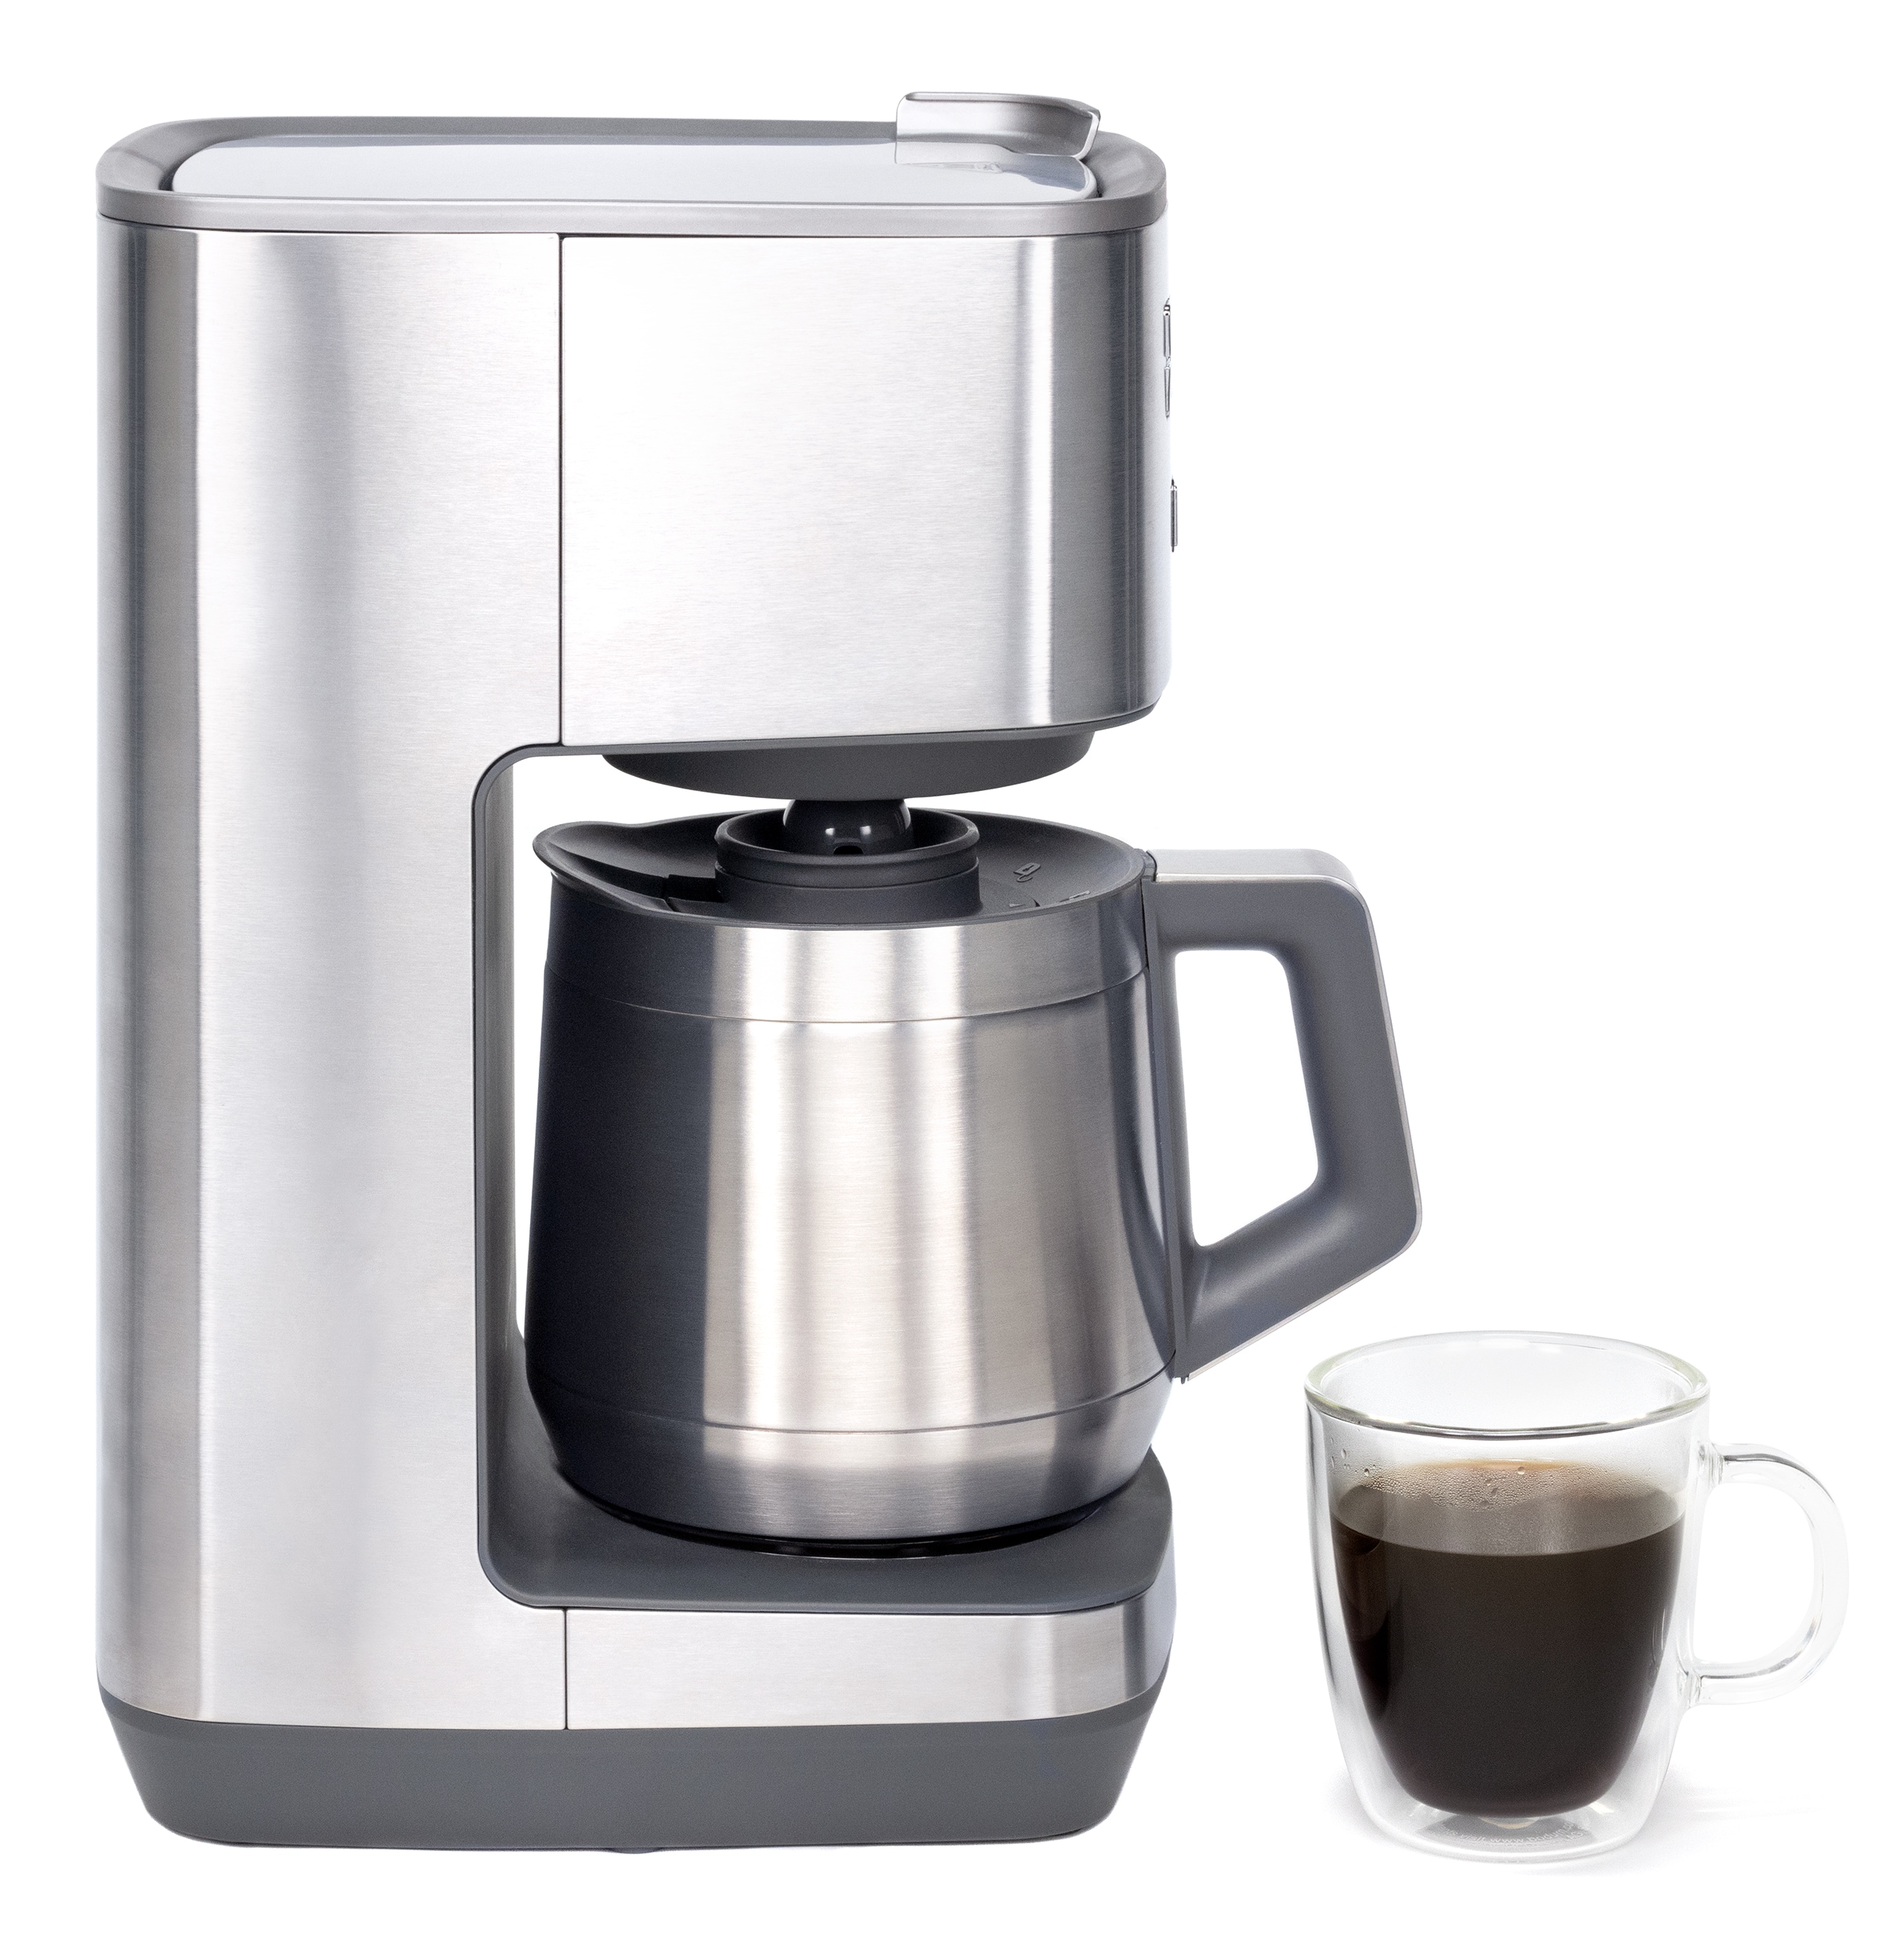 GE Stainless Steel Drip Coffee Maker with 10 Cup Thermal Carafe